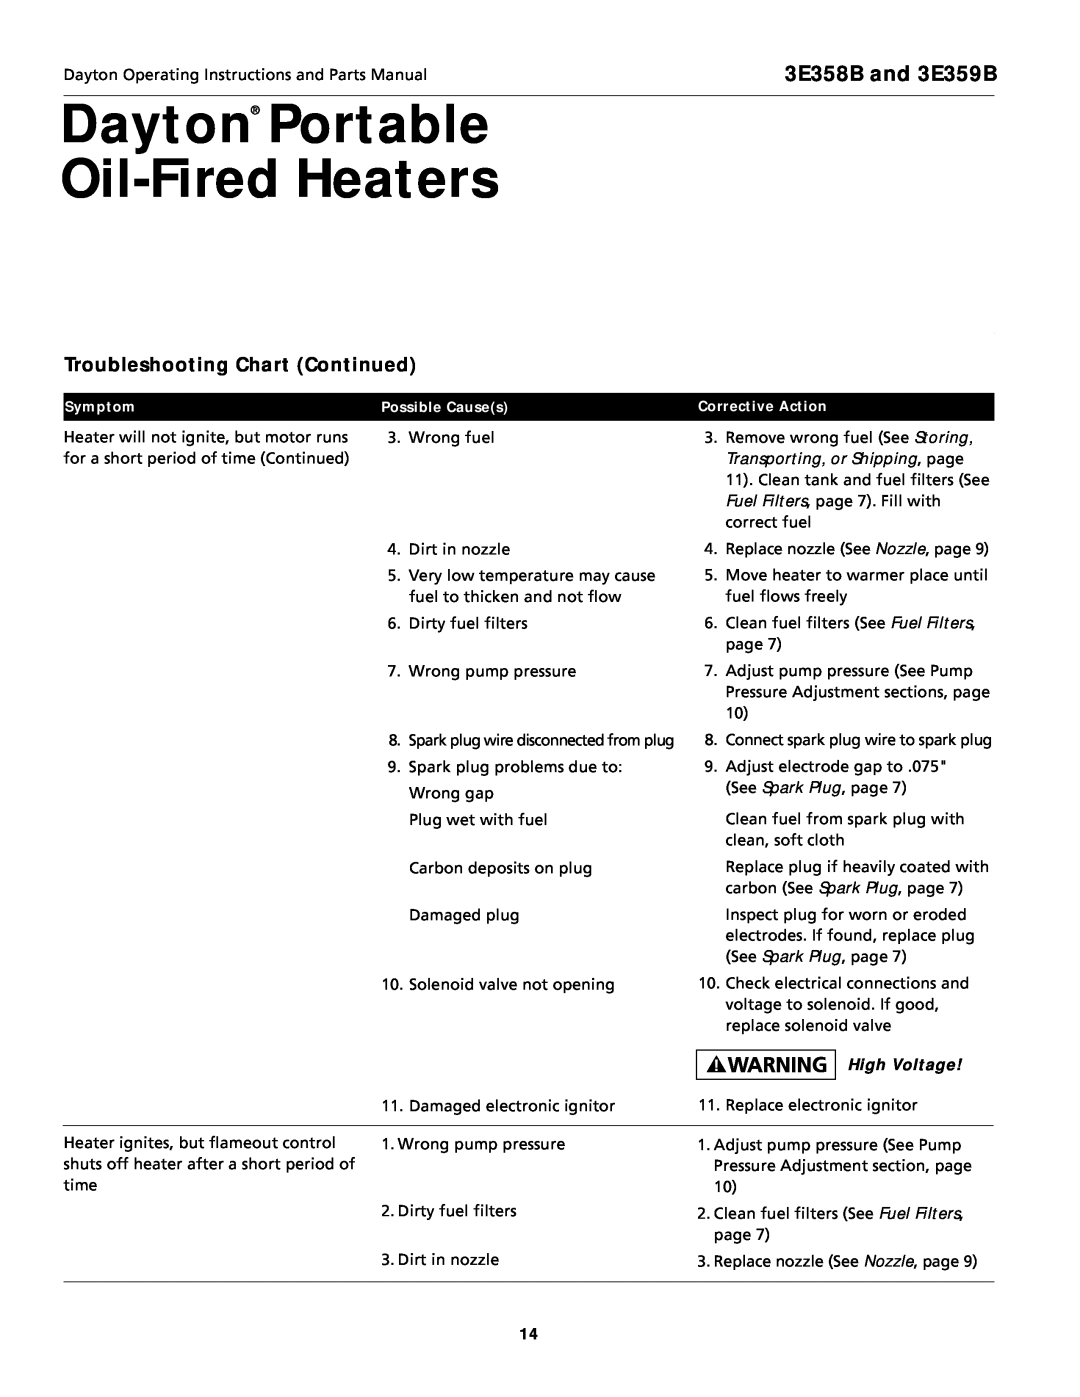 Dayton specifications Dayton Portable Oil-FiredHeaters, 3E358B and 3E359B, Troubleshooting Chart Continued, High Voltage 